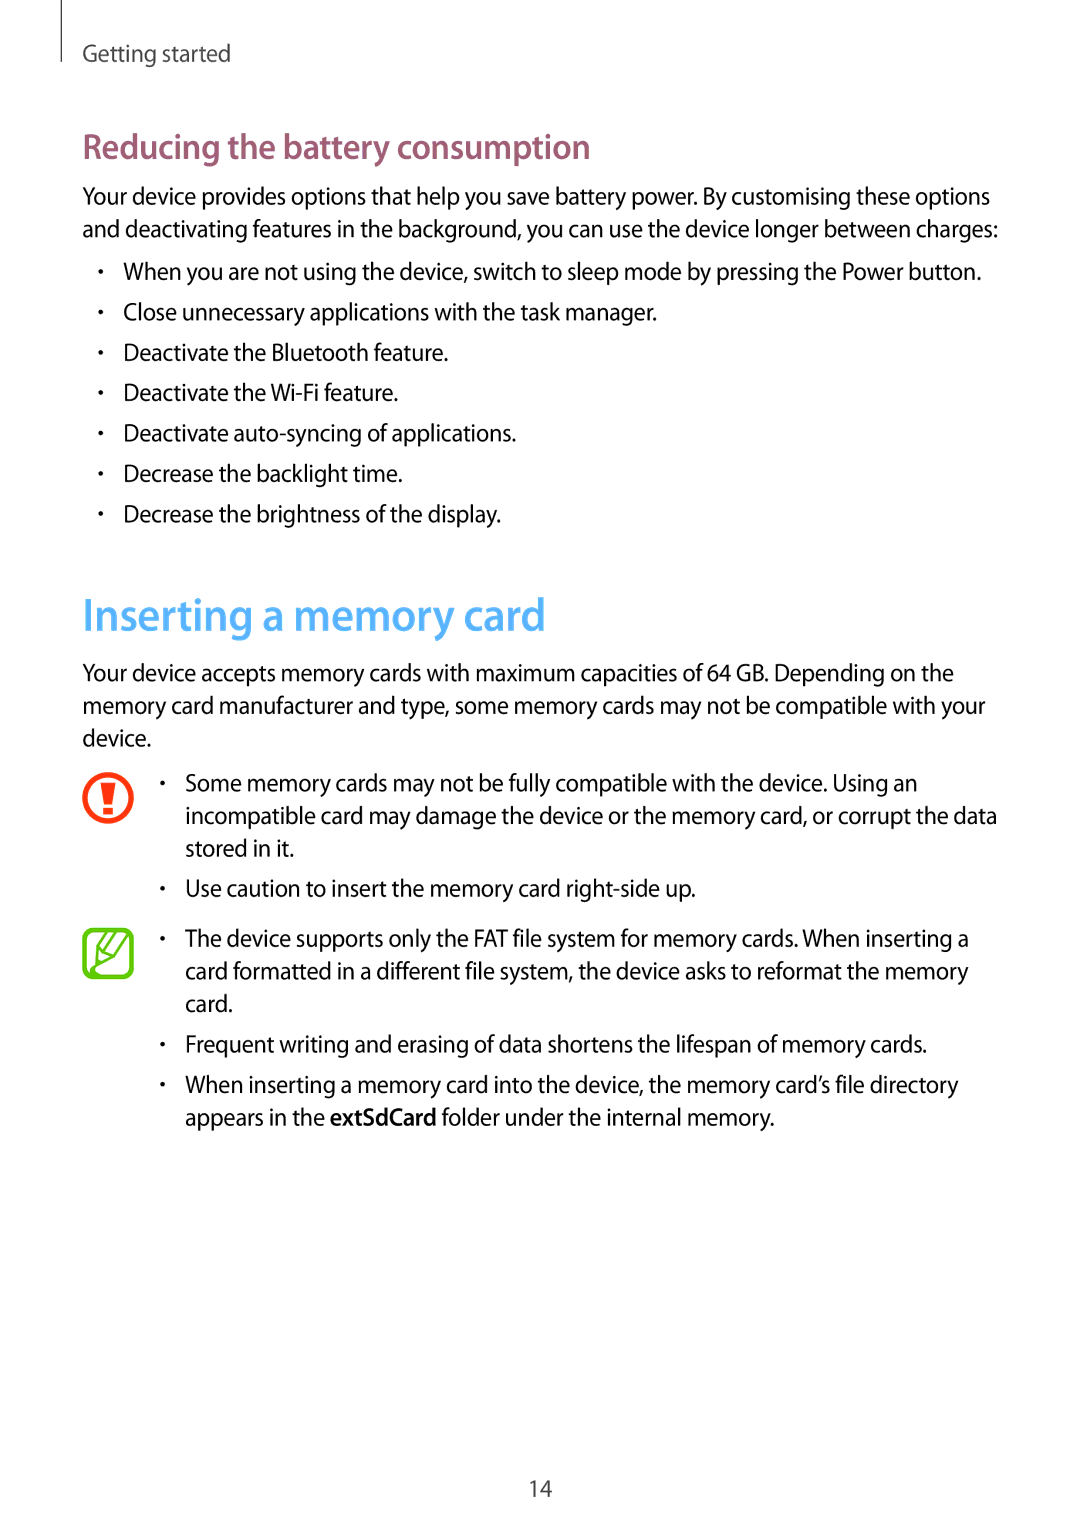 Samsung GT-I9082 user manual Inserting a memory card, Reducing the battery consumption 